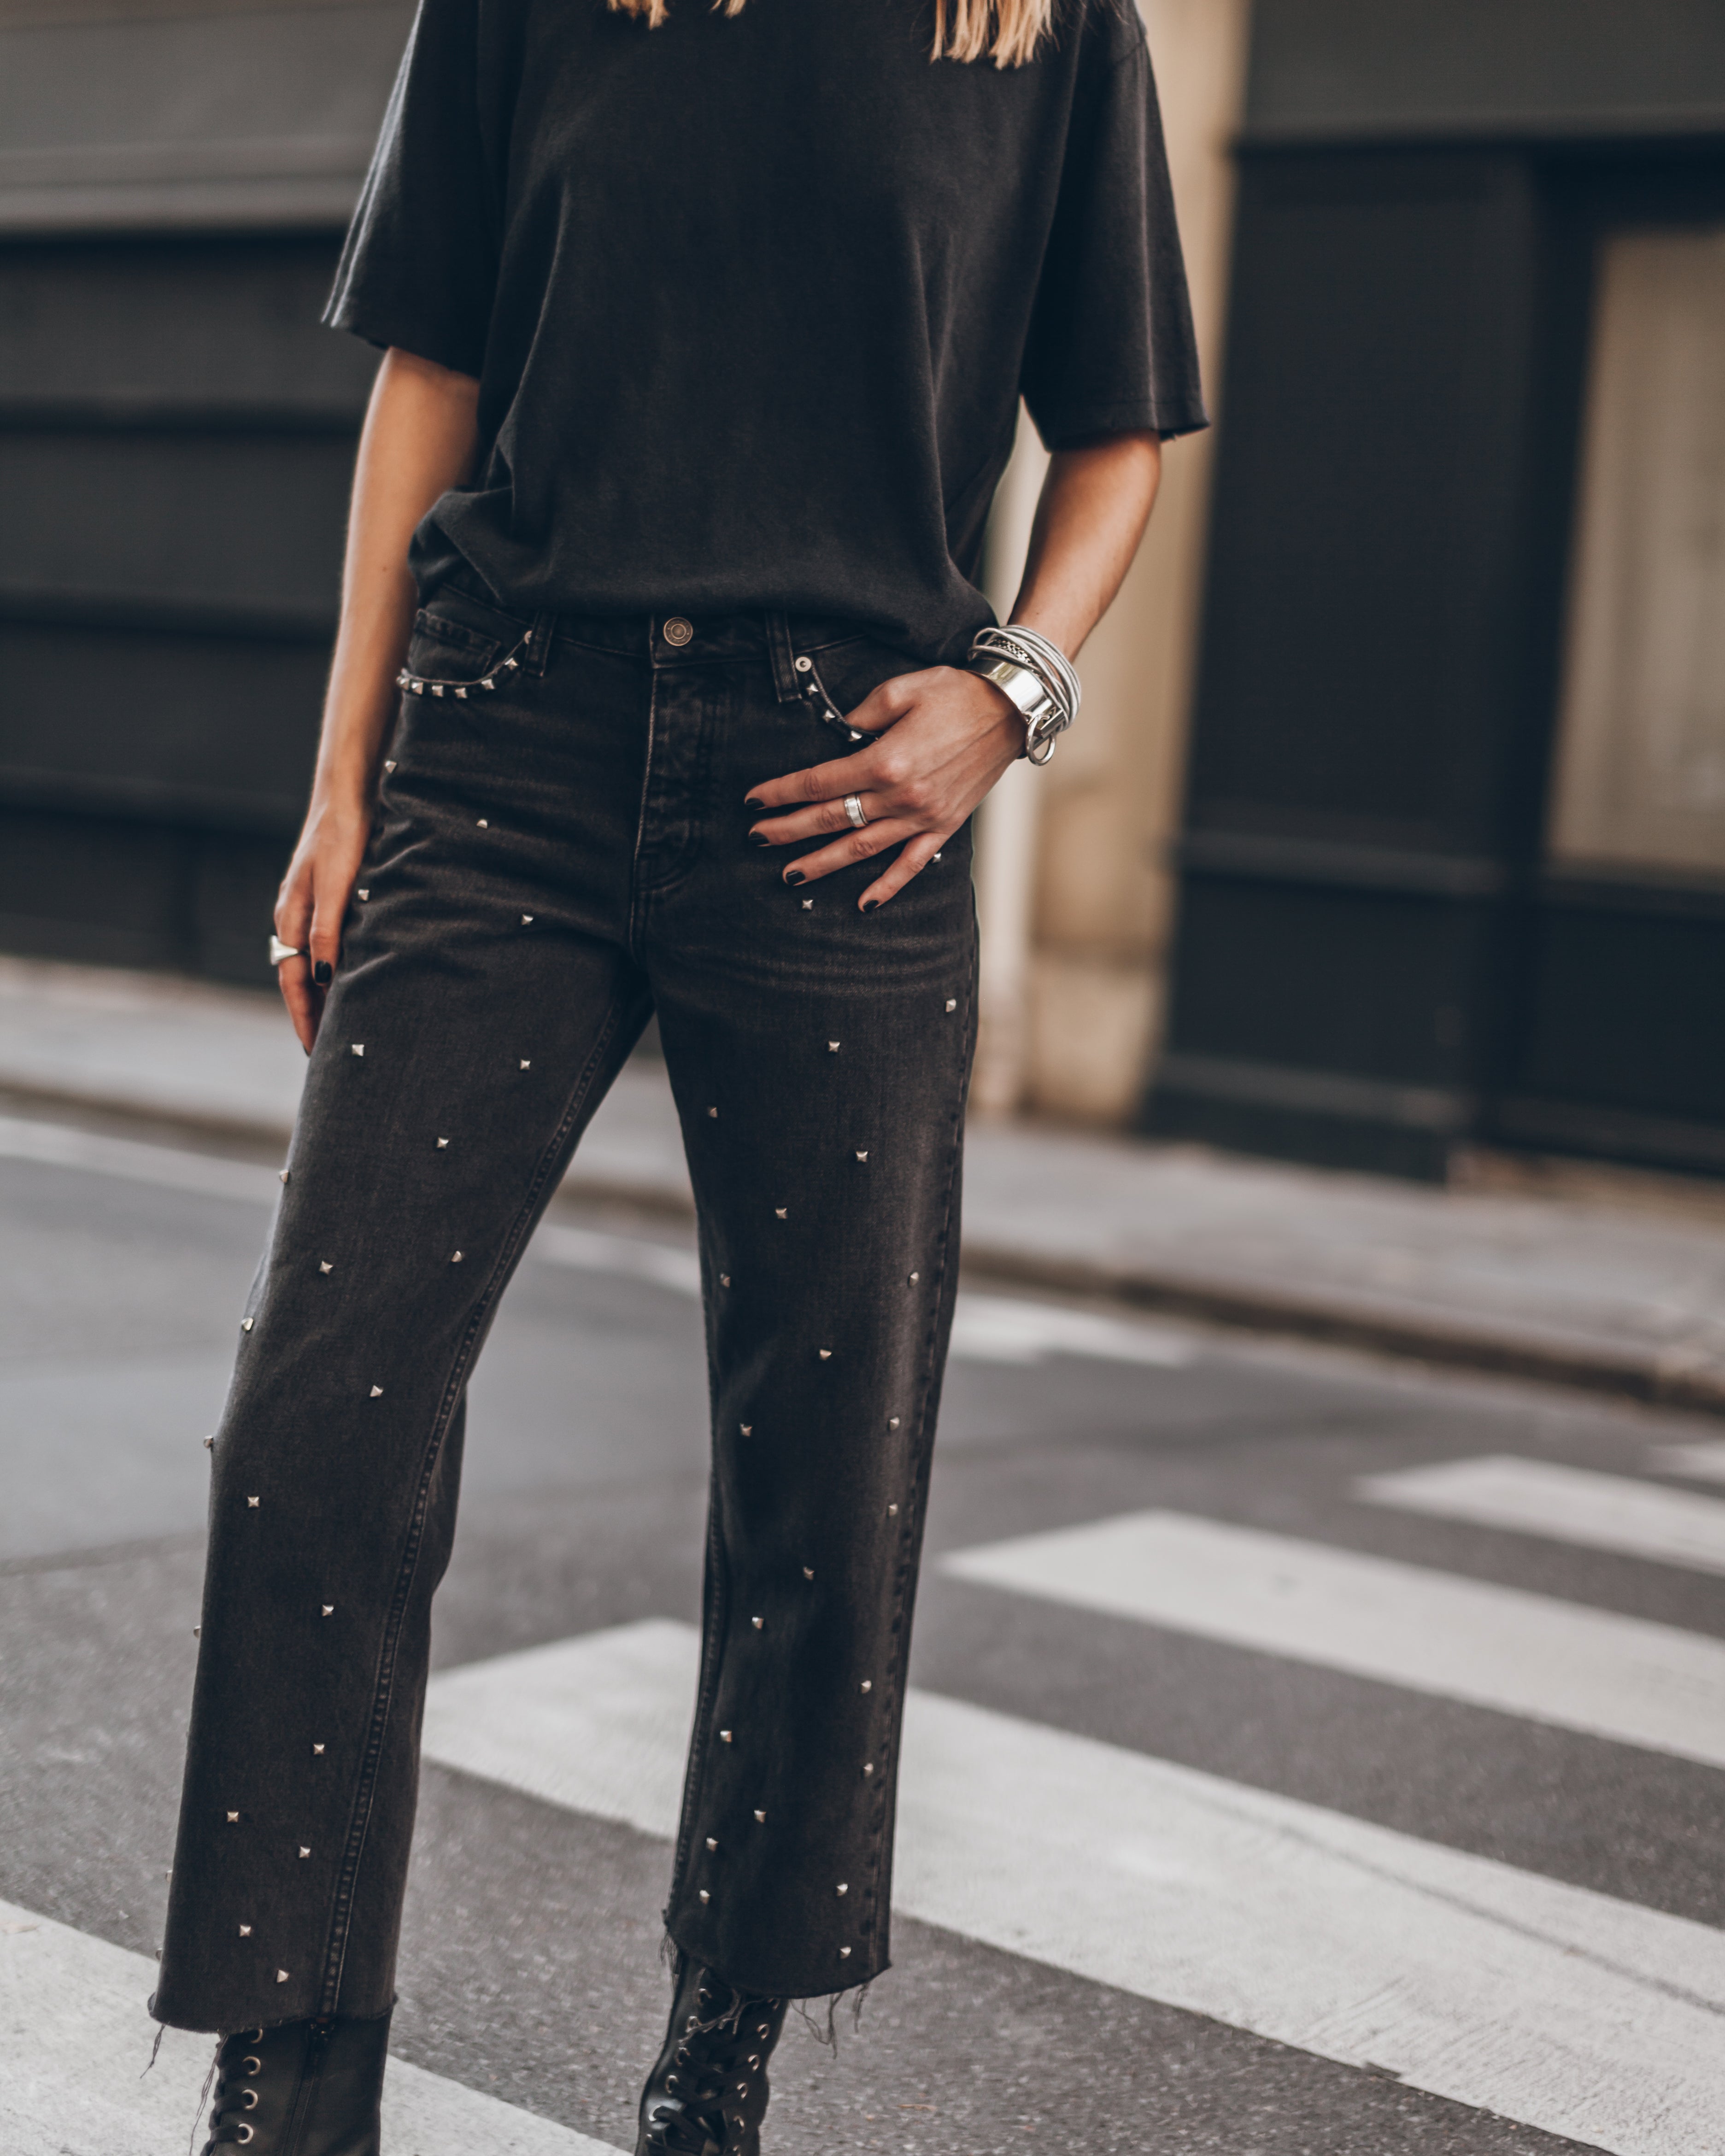 The Black Studded Cropped Straight Jeans